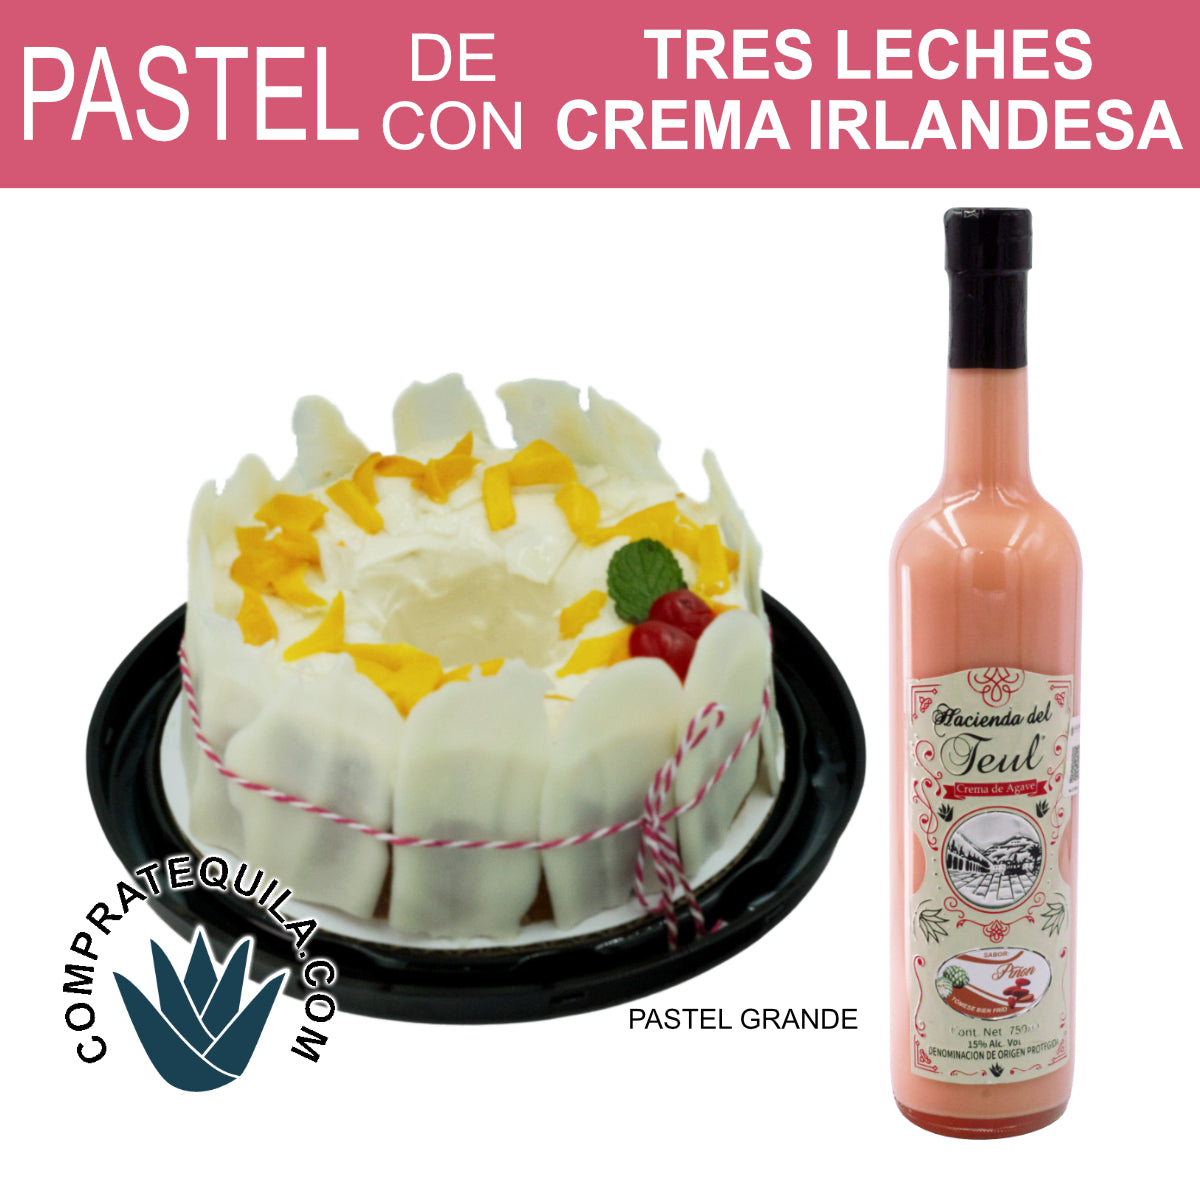 Exquisite Celebration: Special Edition Tres Leches Cake with Mezcal Agave Cream for Mother's Day